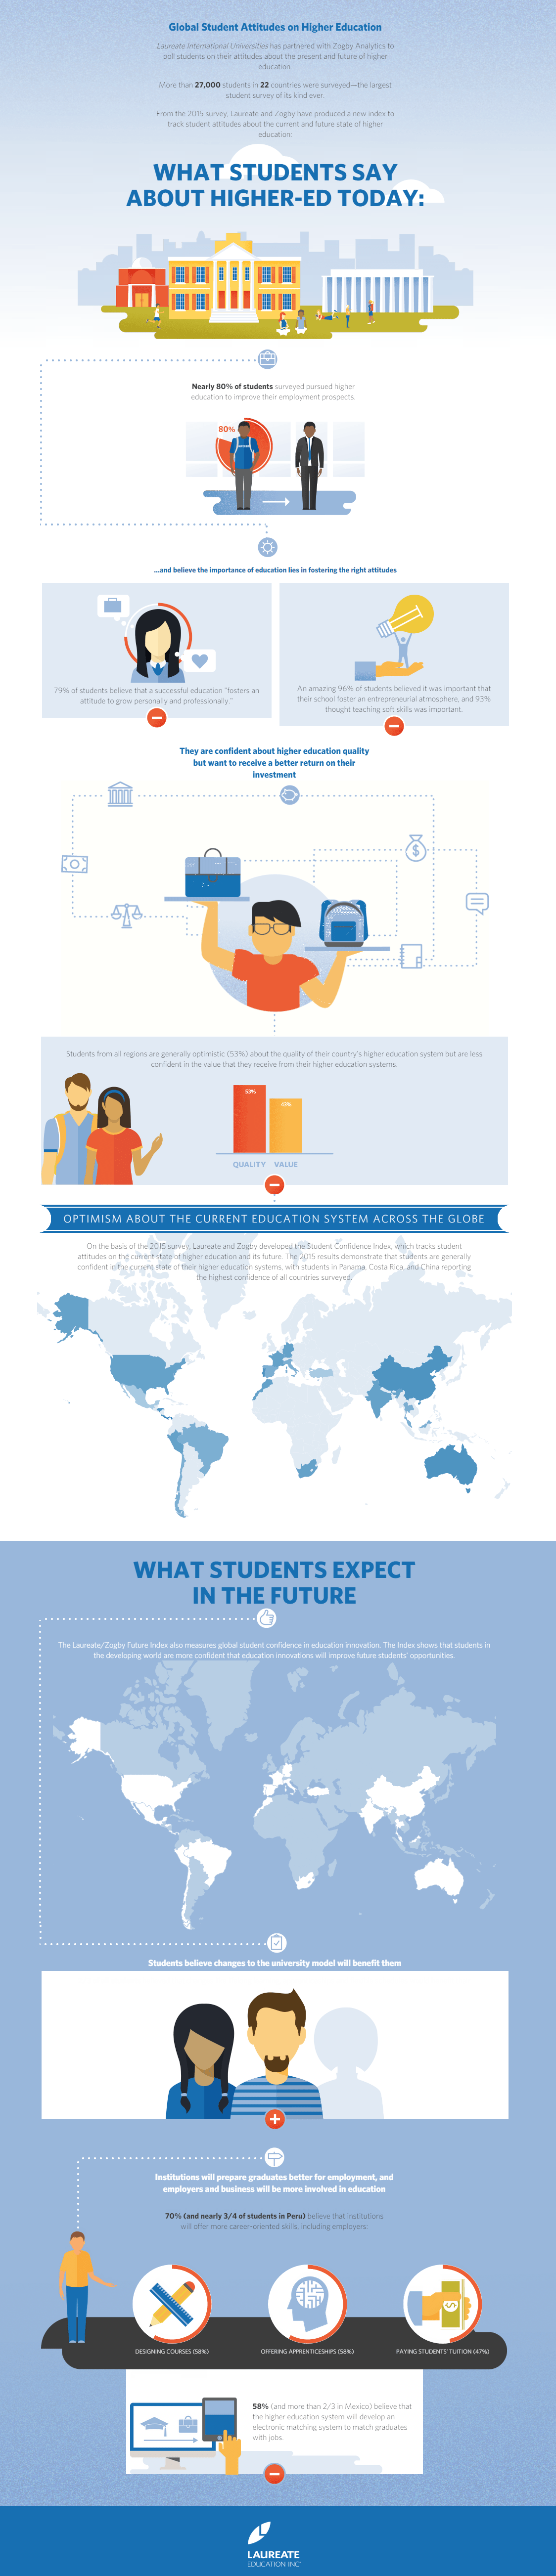 undocumented students and higher education infographic